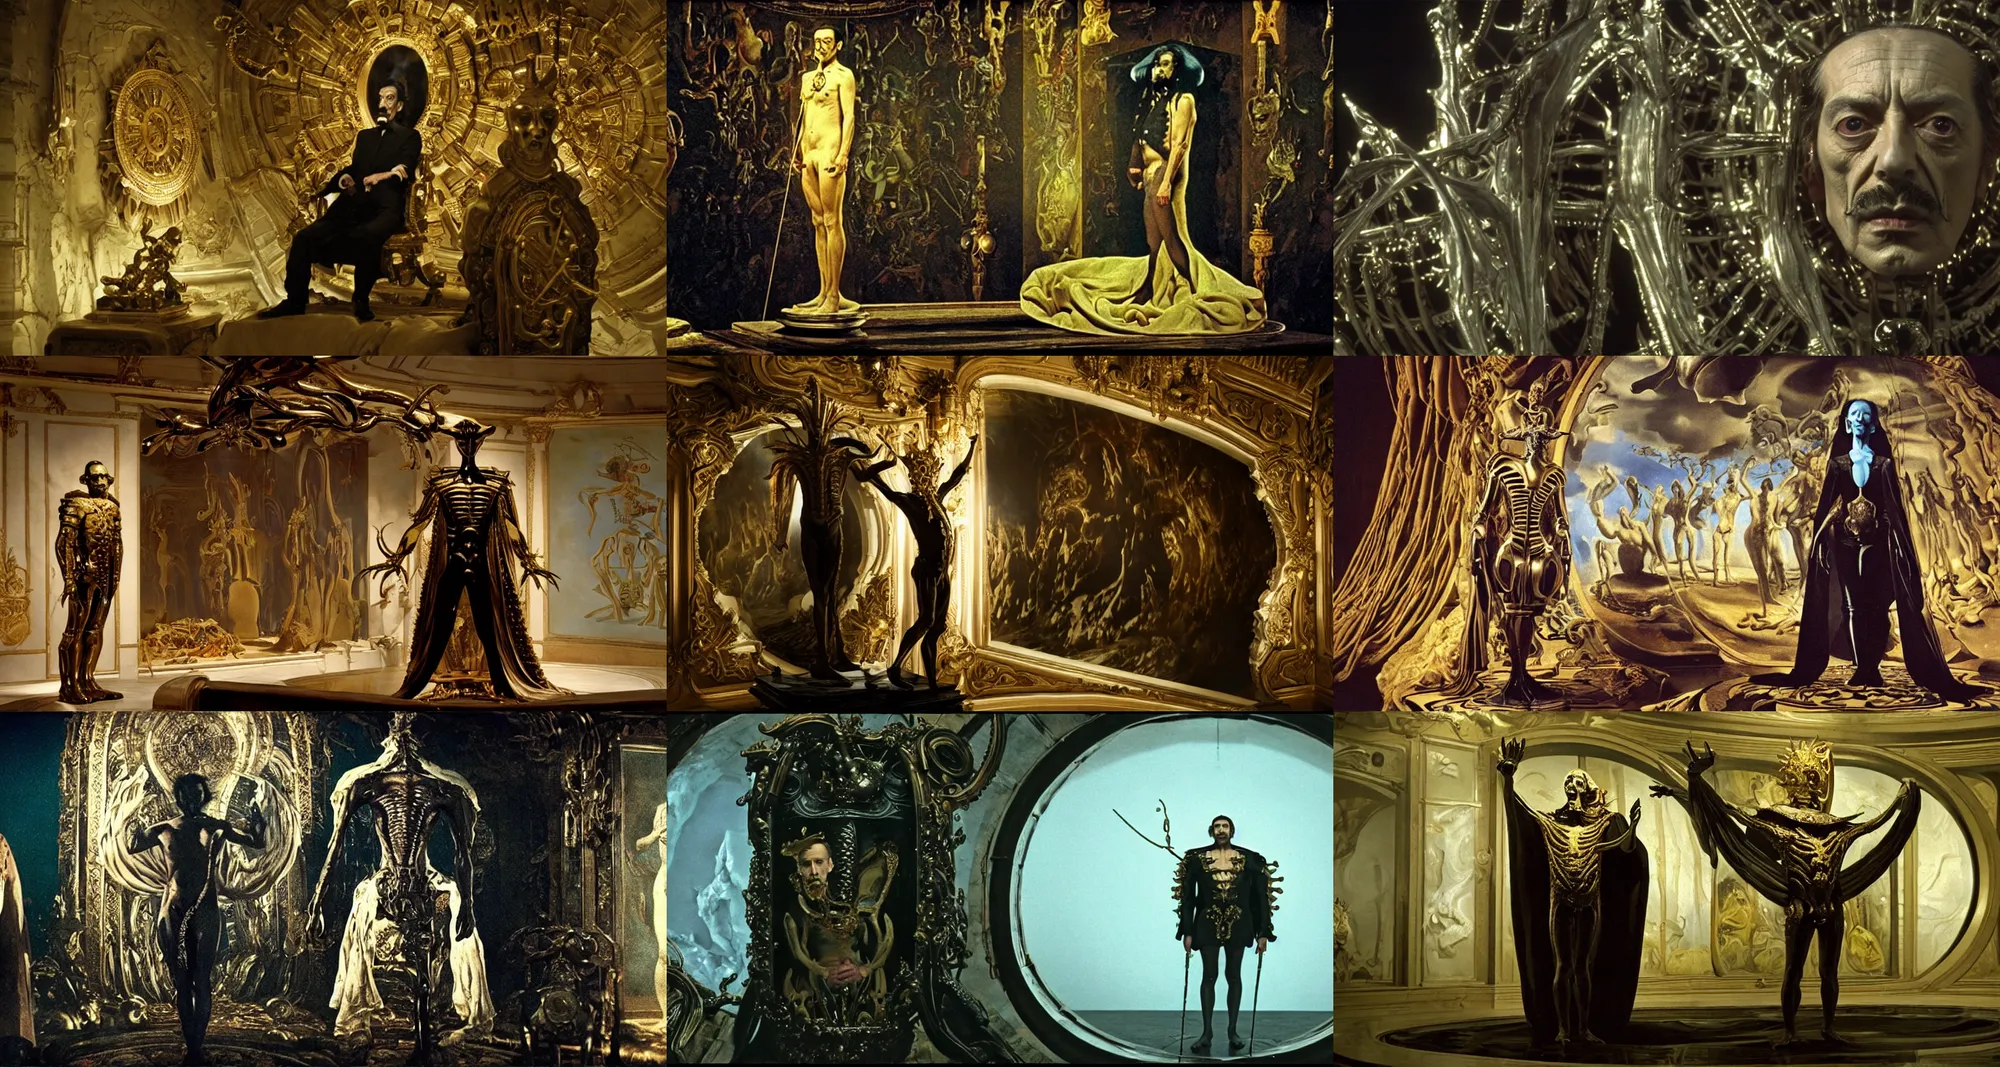 Prompt: the full body shot of arrogant salvador dali in the role of emperor of universe | porthole in the wall of palace | still frame from the prometheus movie by ridley scott with cinematogrophy of christopher doyle and art direction by hans giger, anamorphic bokeh and lens flares, 8 k, higly detailed masterpiece